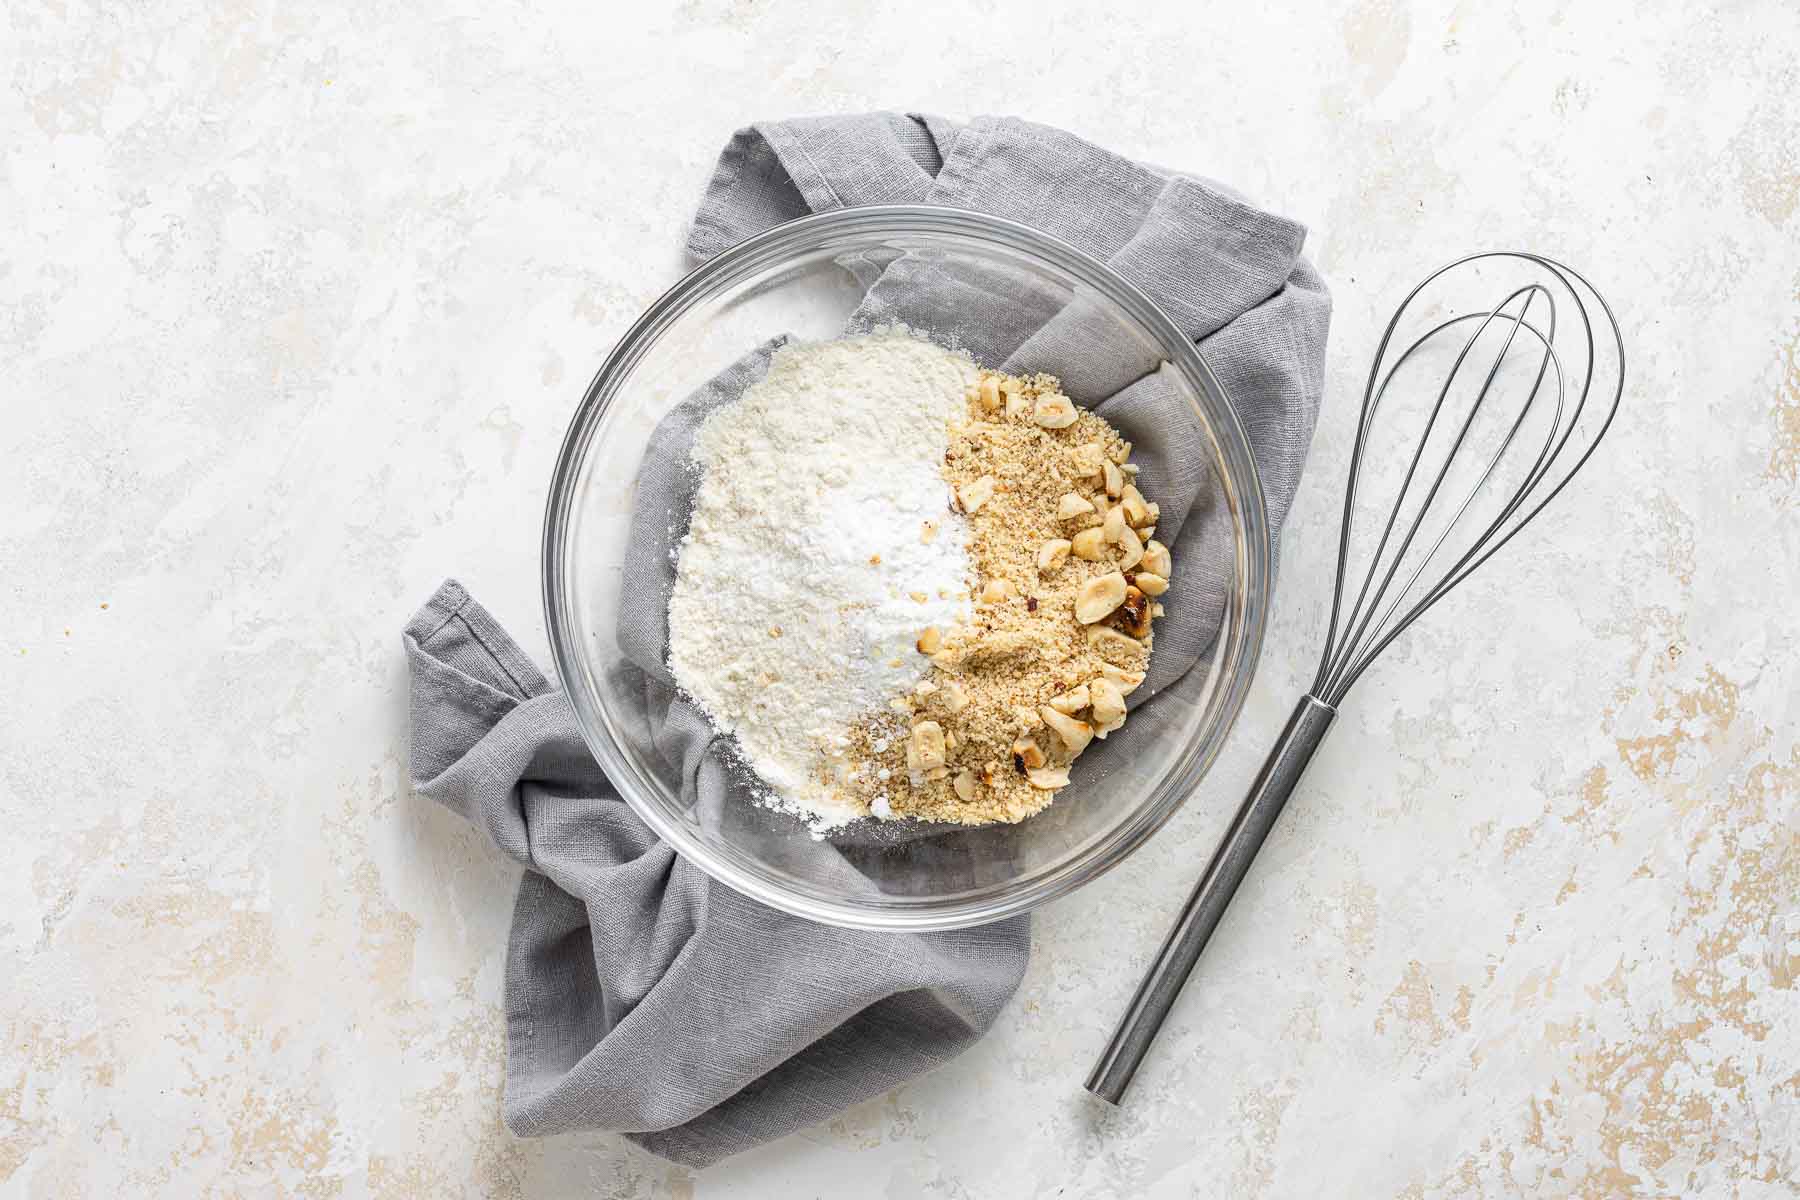 Flour and hazelnut meal in a bowl with whisk.